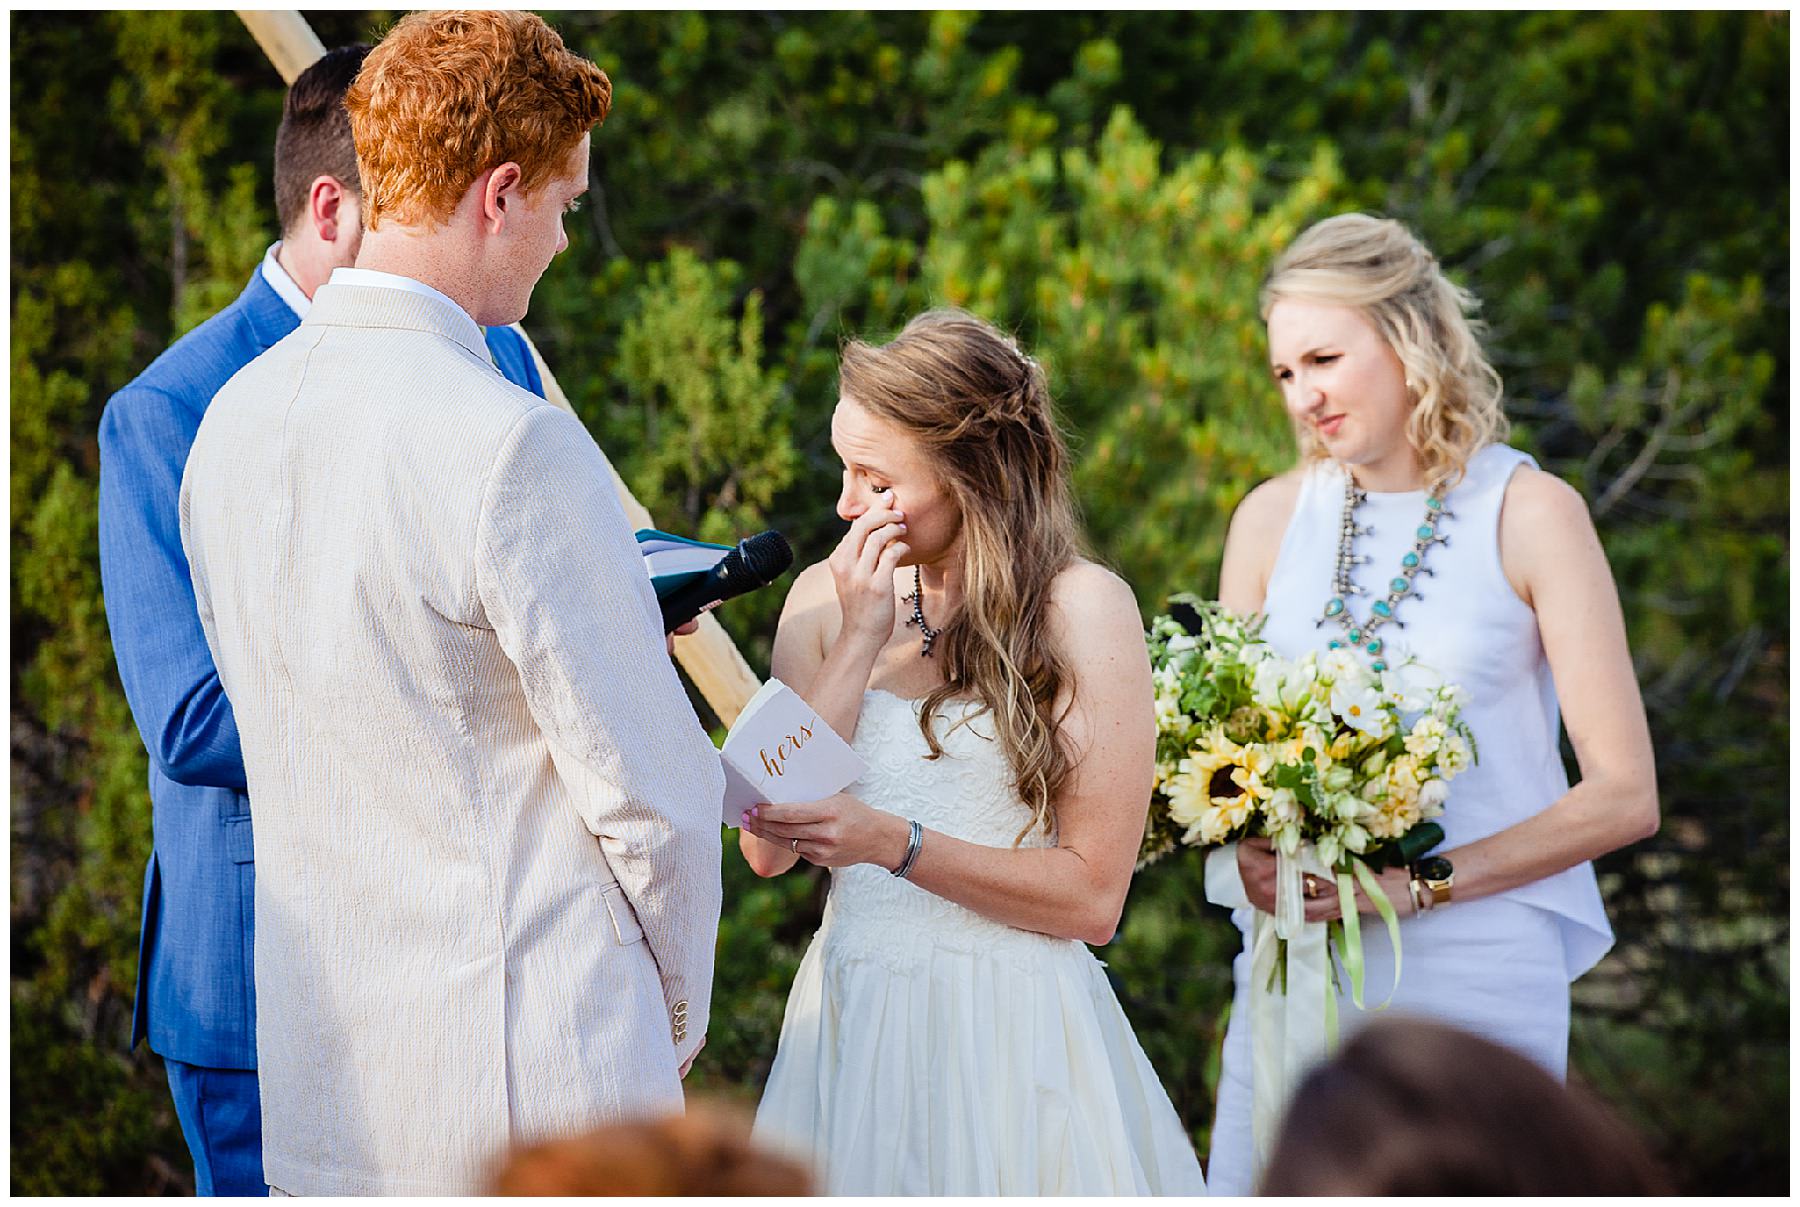 Bride crying while saying vows during outdoor wedding ceremony